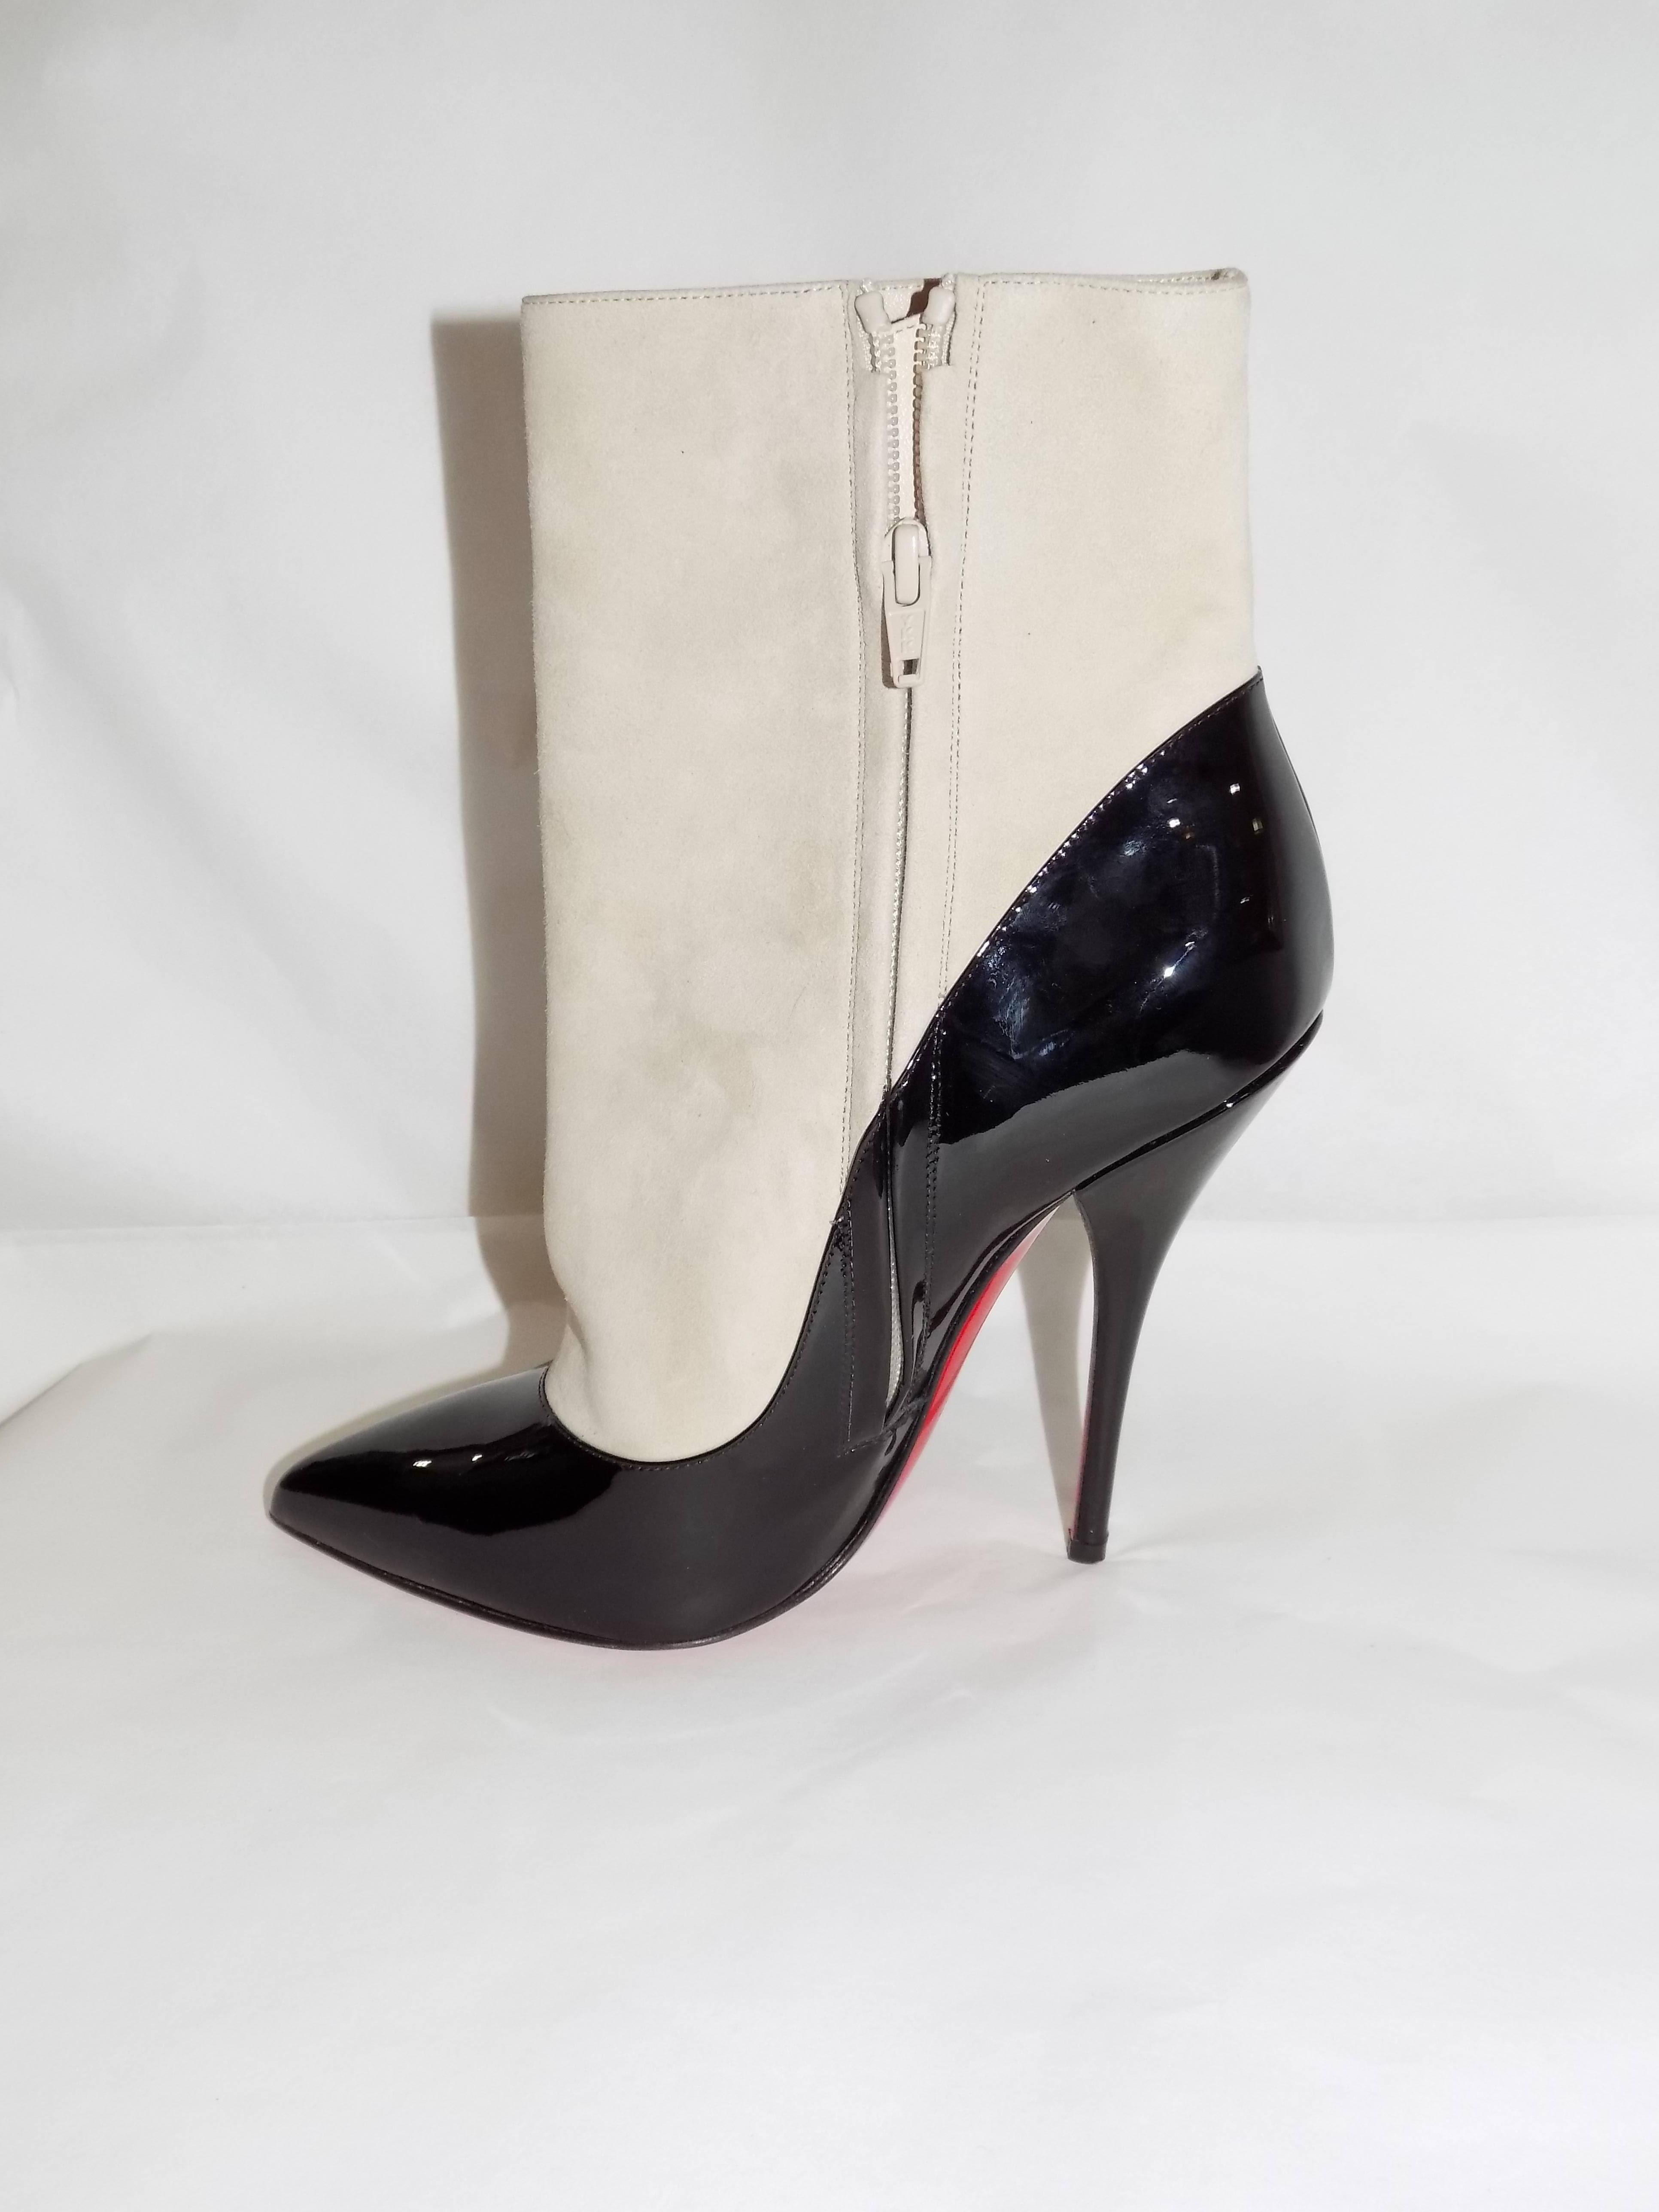 Christian Louboutin suede and patent leather ankle boots New sz 39 